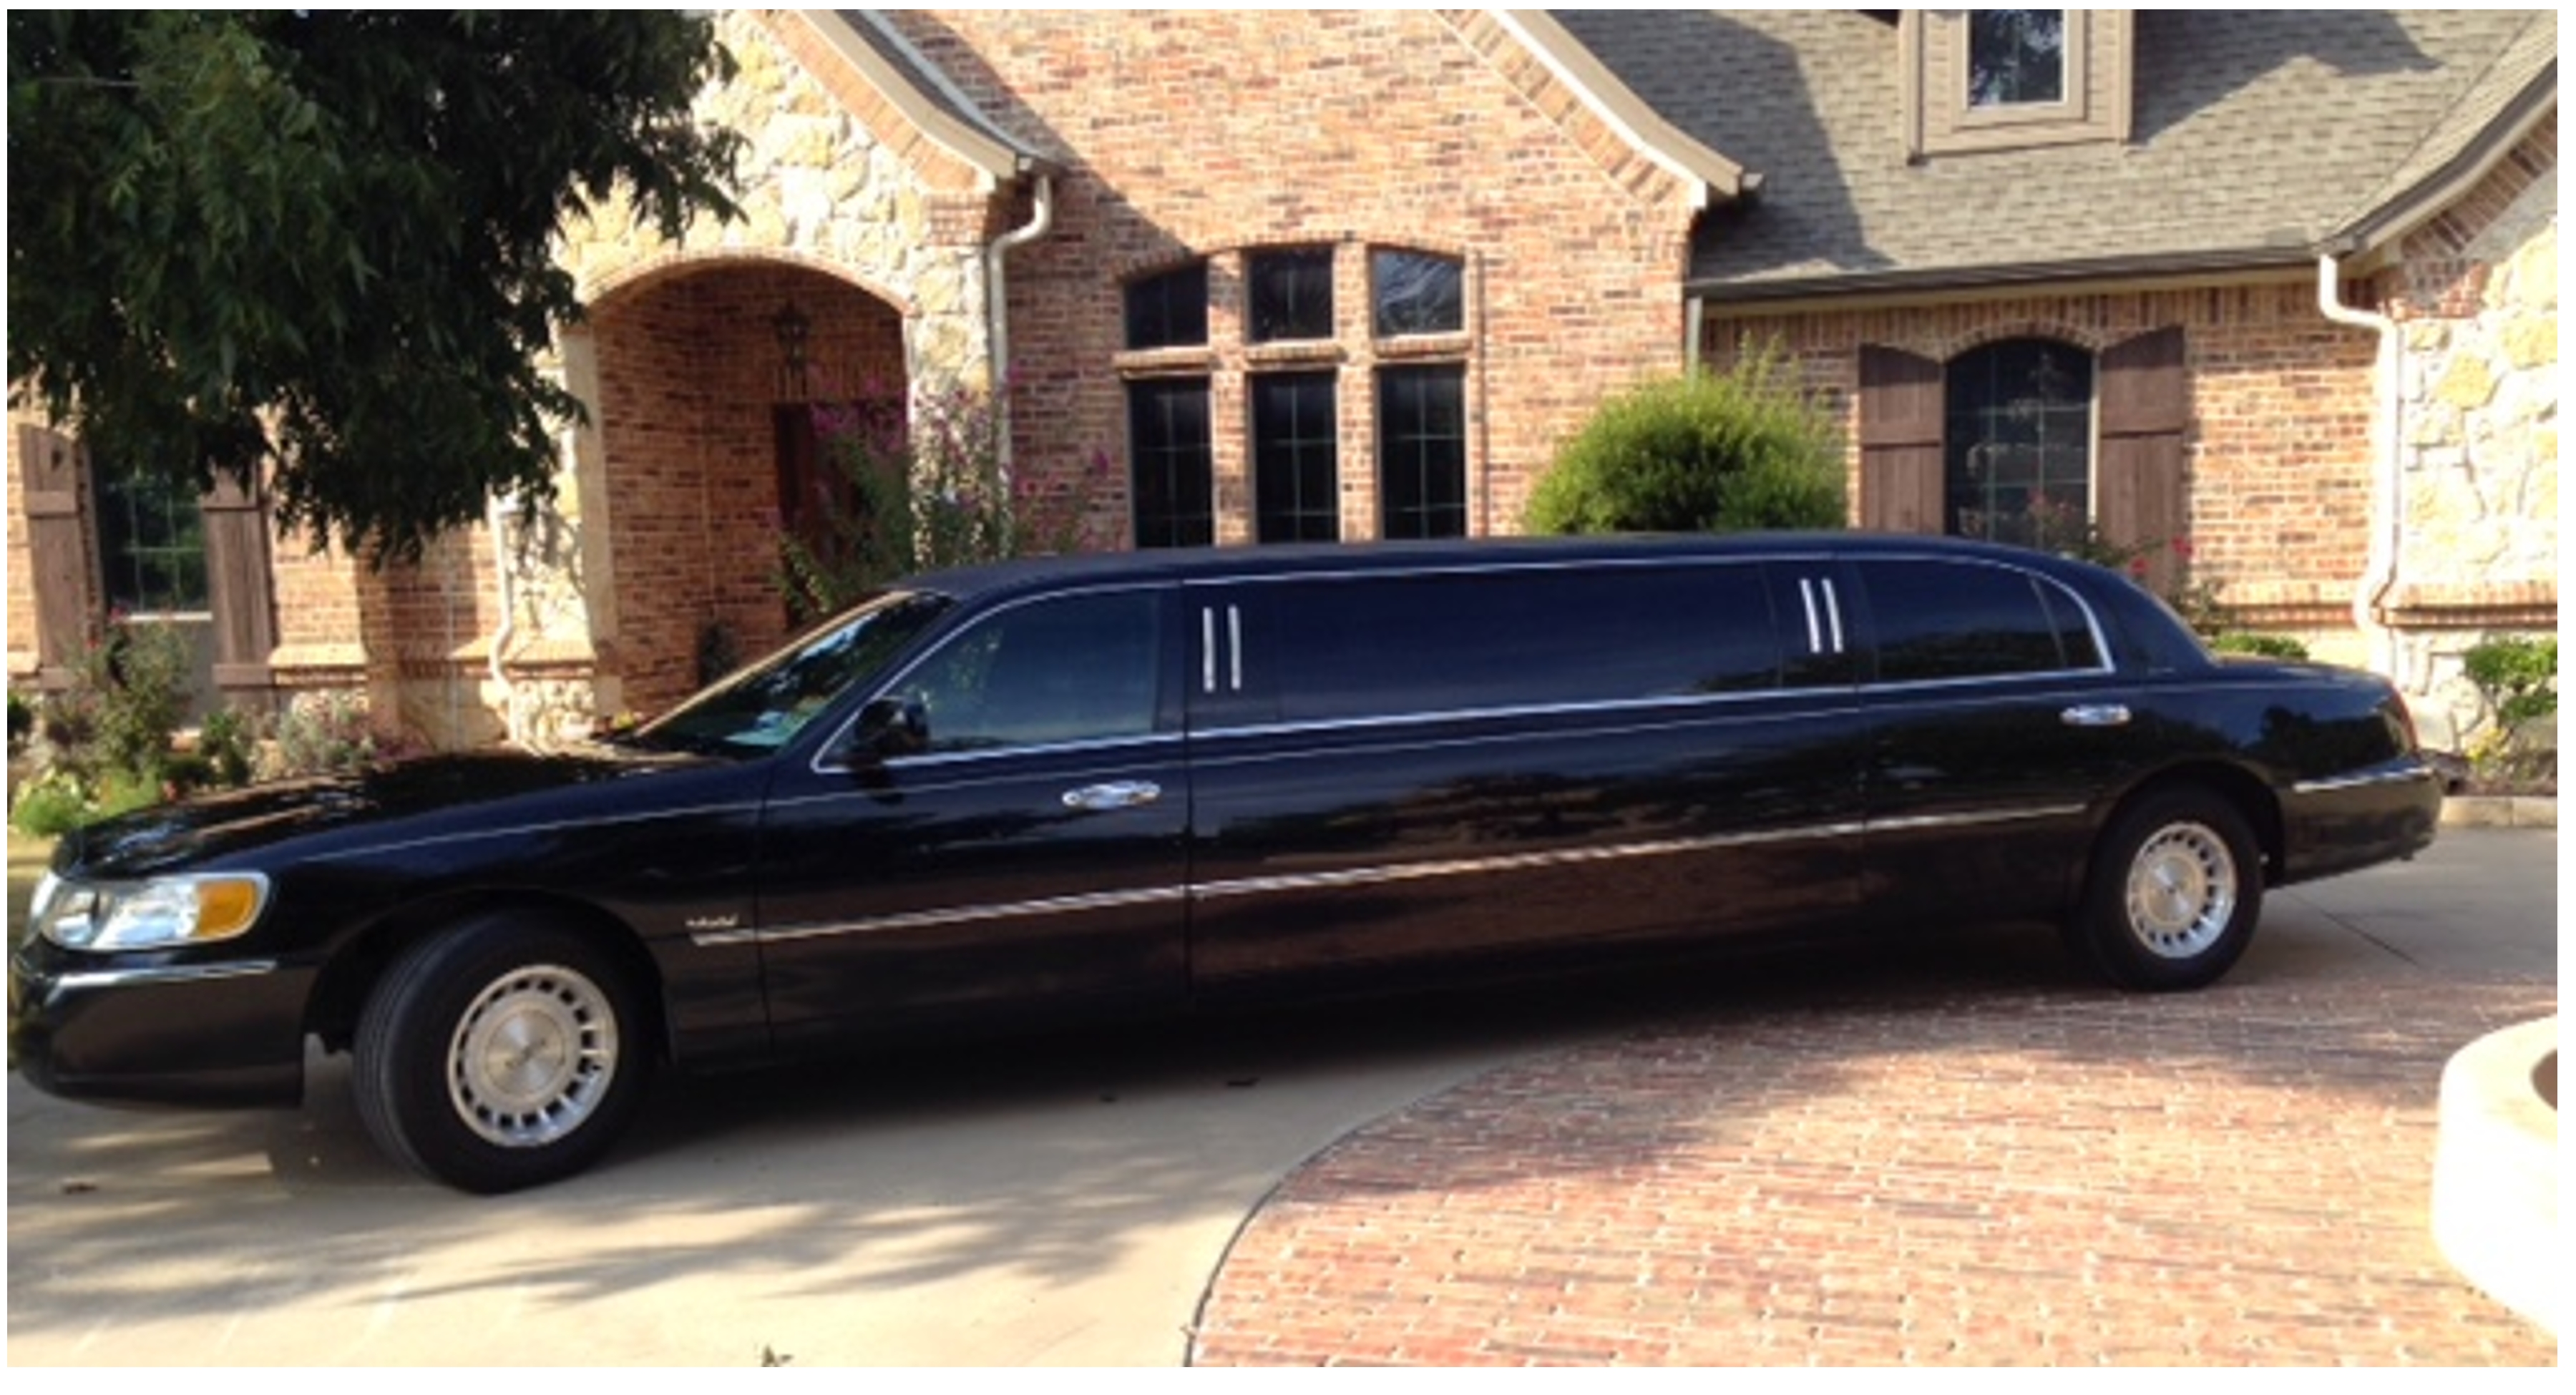 Our eight passenger stretch limo